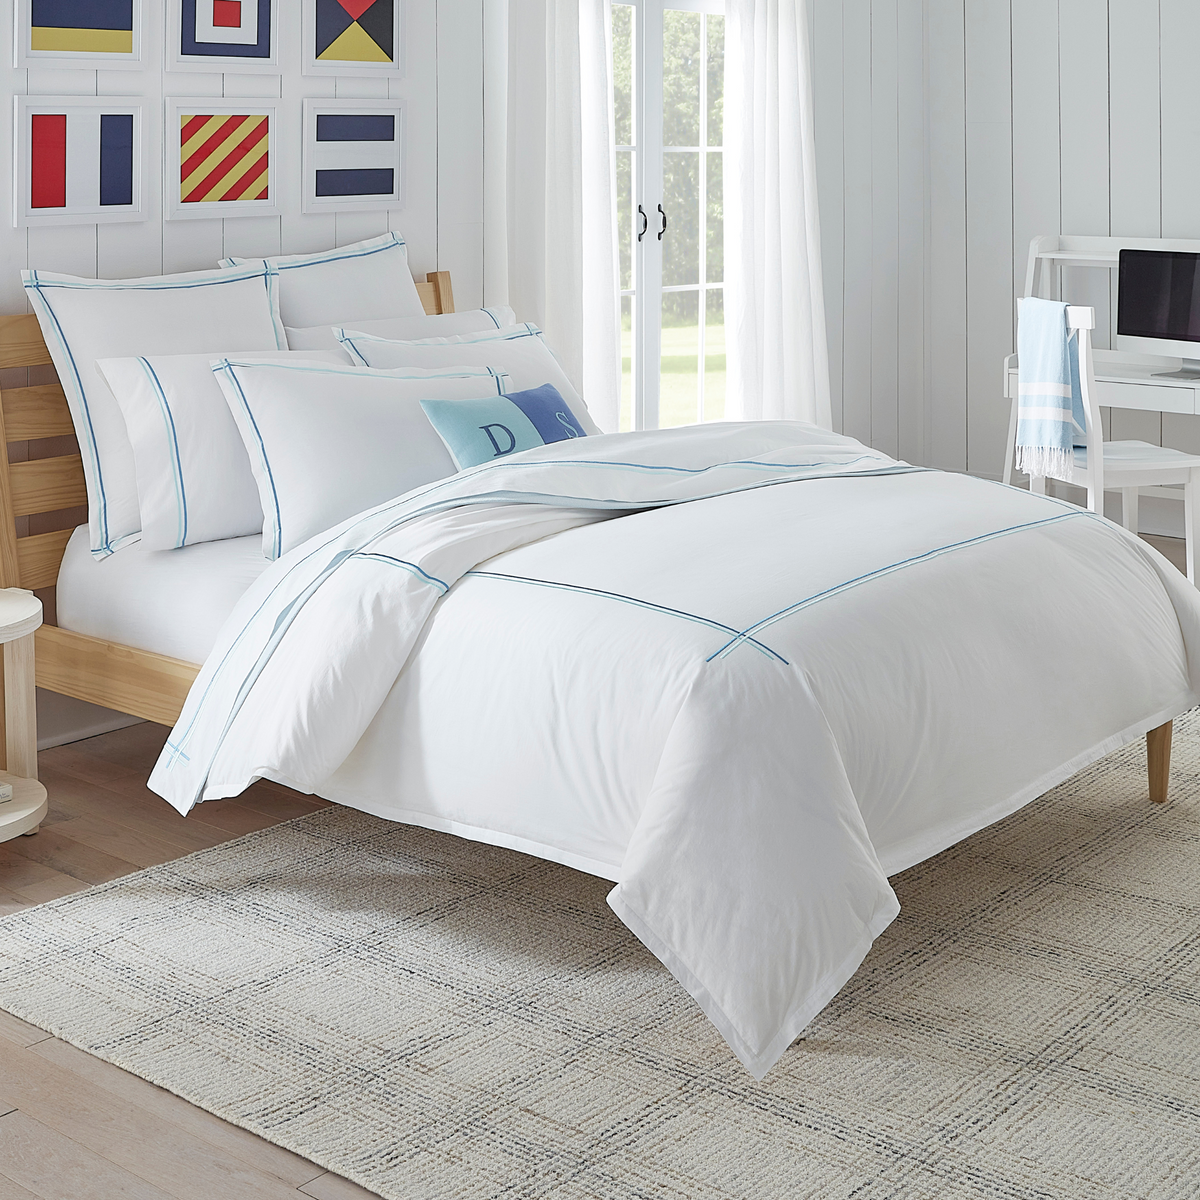 Sferra Tratto Bedding Full Lifestyle Angled White/Clearwater